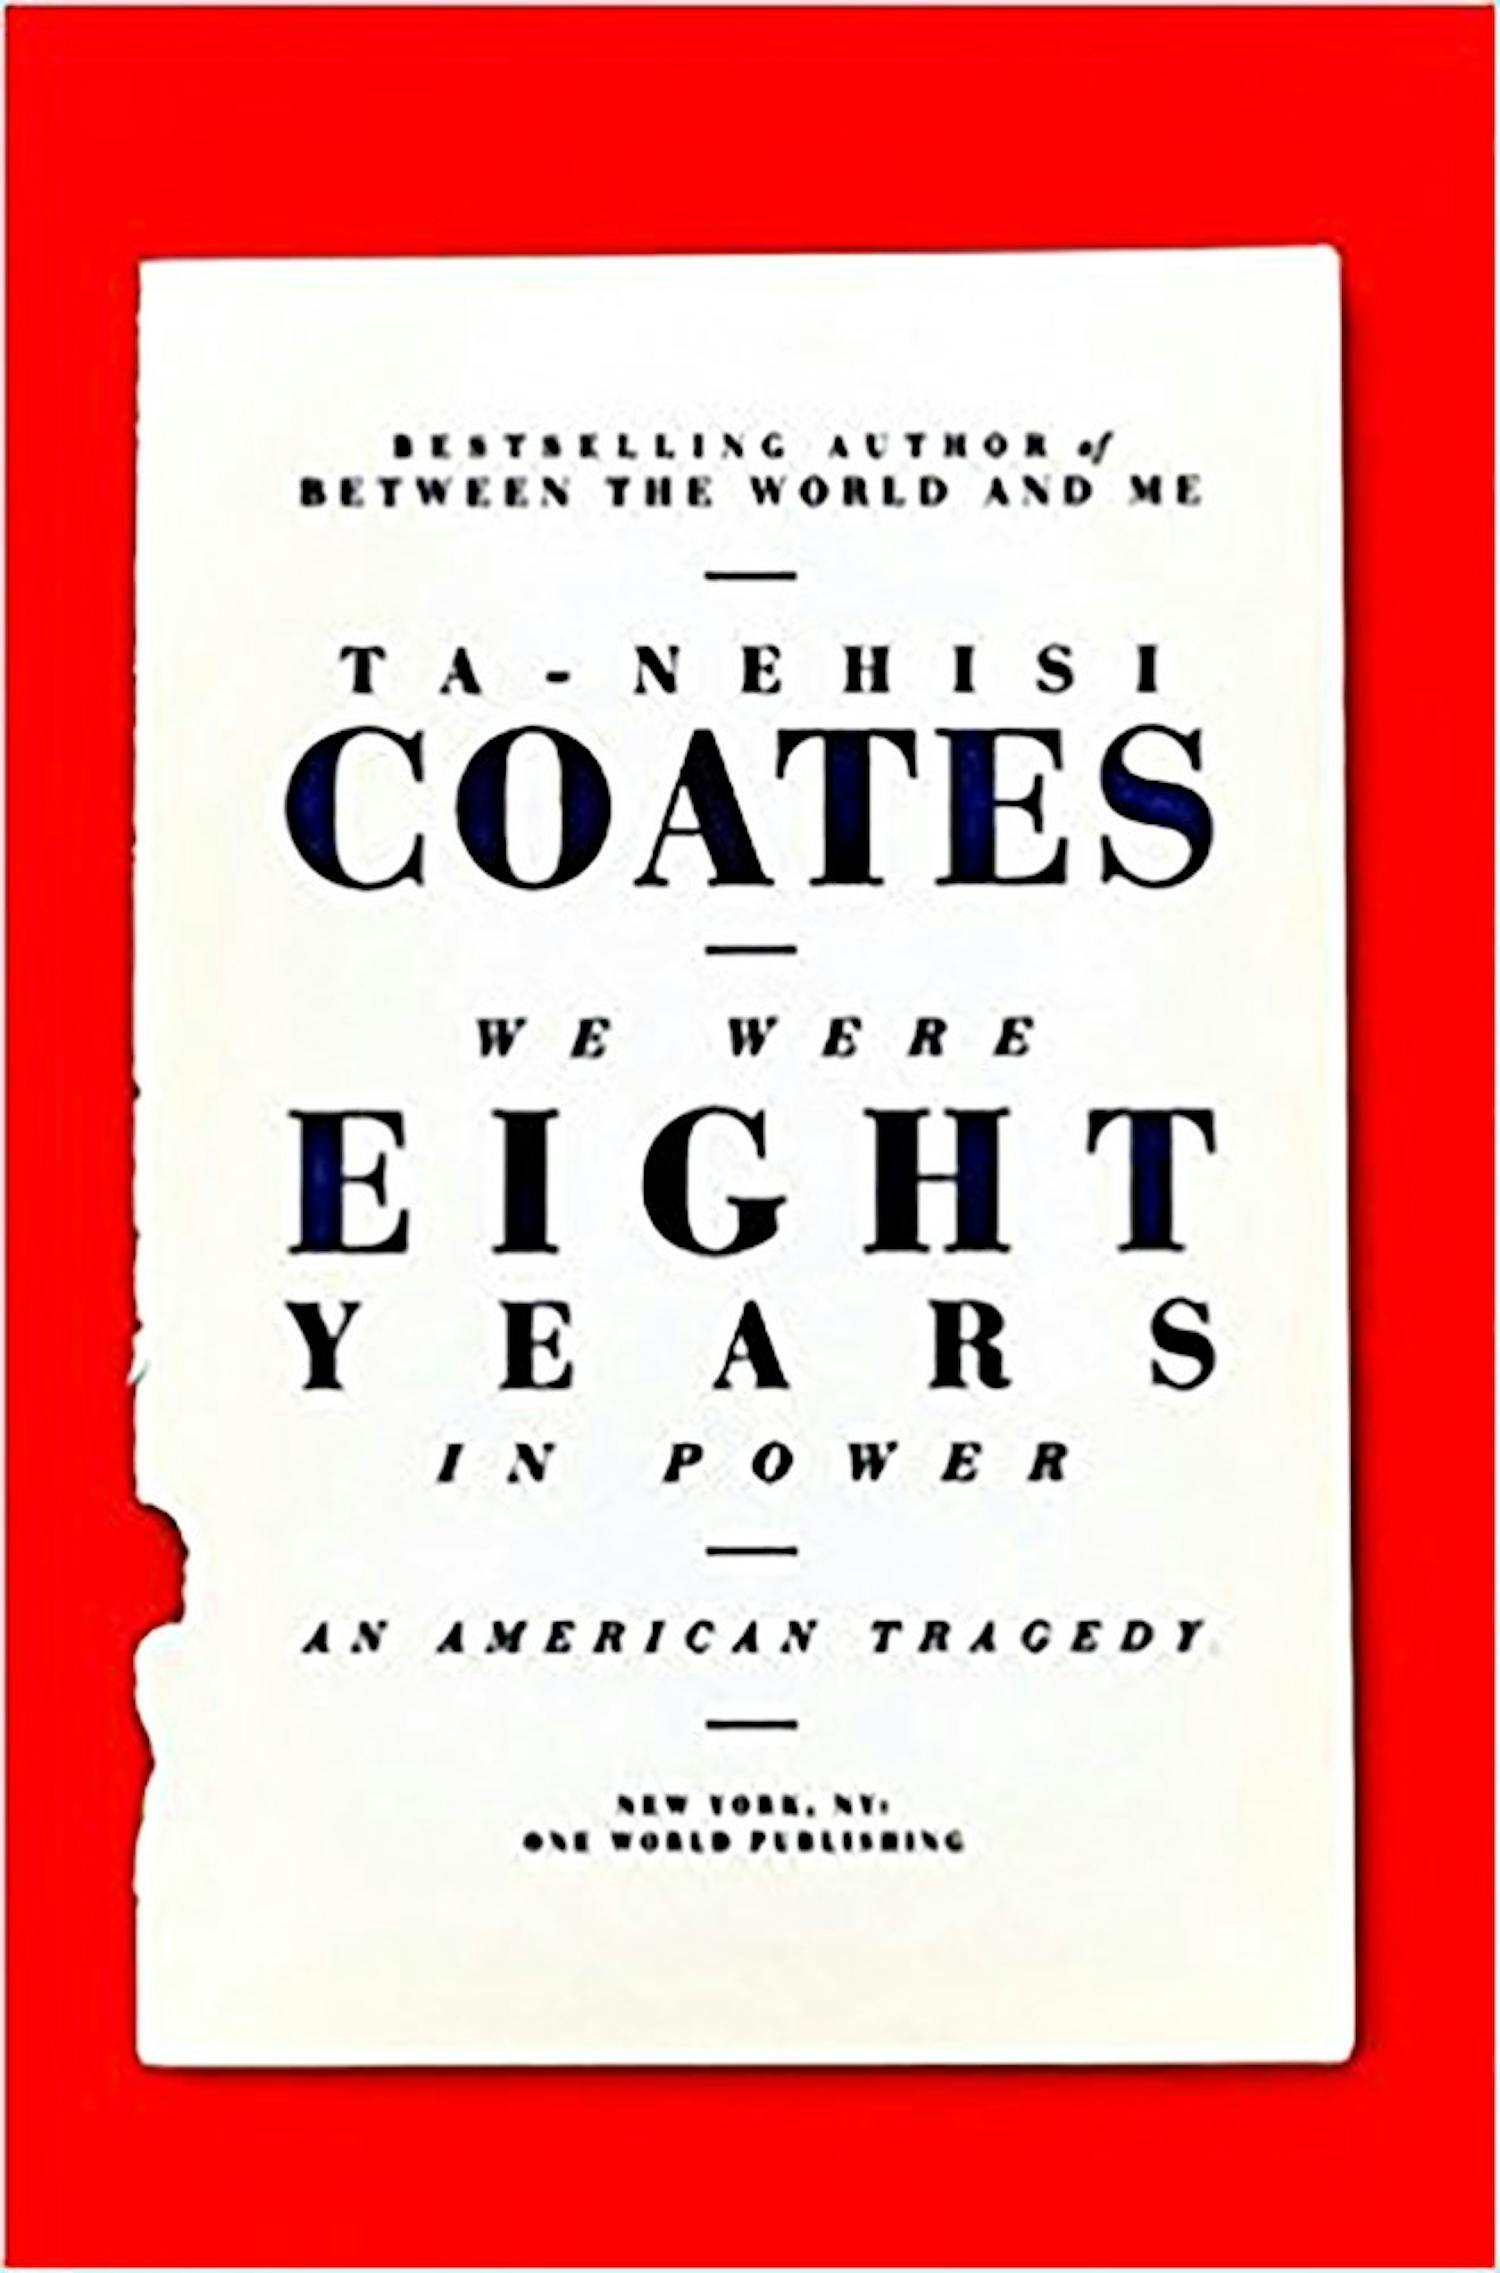 Ta Nehisi-Coates, author and writer for The Atlantic, released his latest book “We Were Eight Years In Power” last week. The book takes a look back at essays penned during the Obama administration and includes personally-inclined notes from the author.